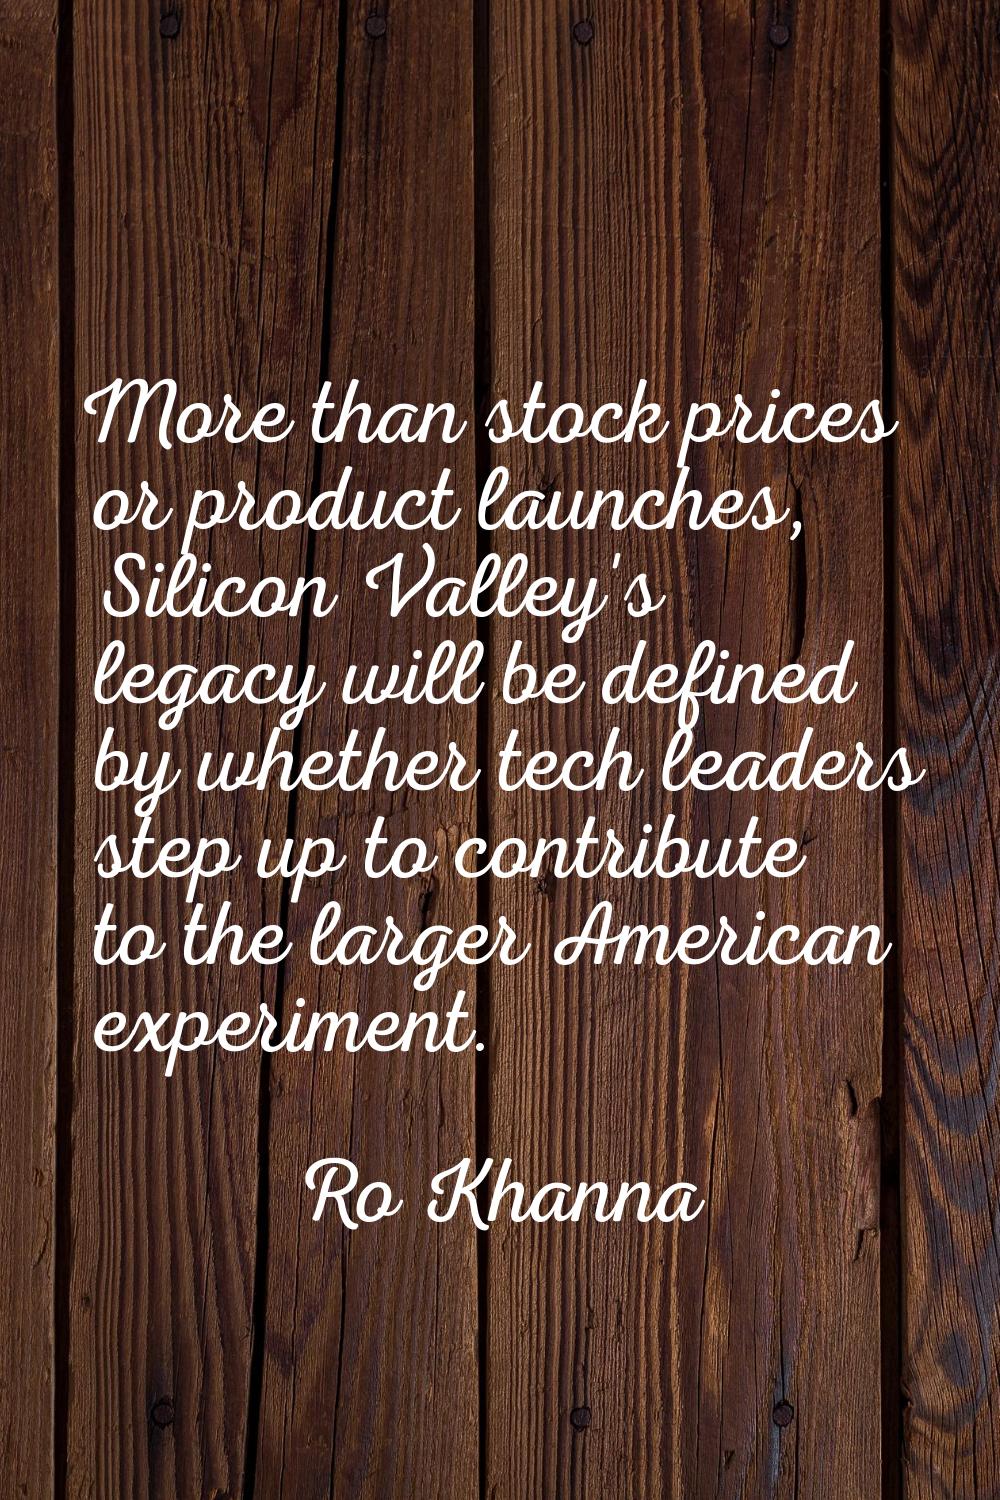 More than stock prices or product launches, Silicon Valley's legacy will be defined by whether tech